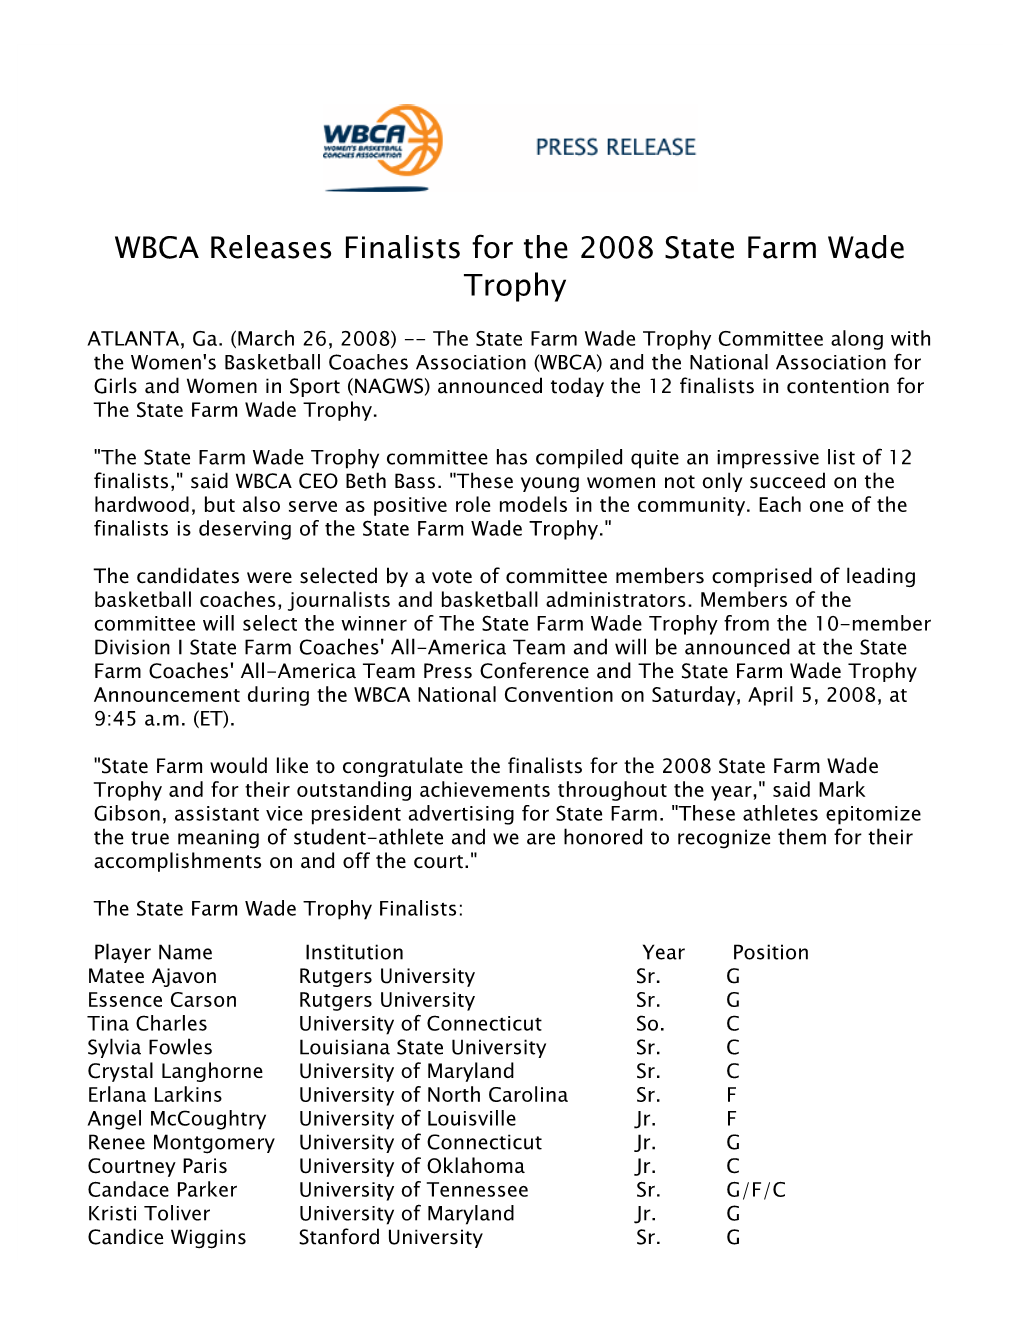 WBCA Releases Finalists for the 2008 State Farm Wade Trophy 2007-08